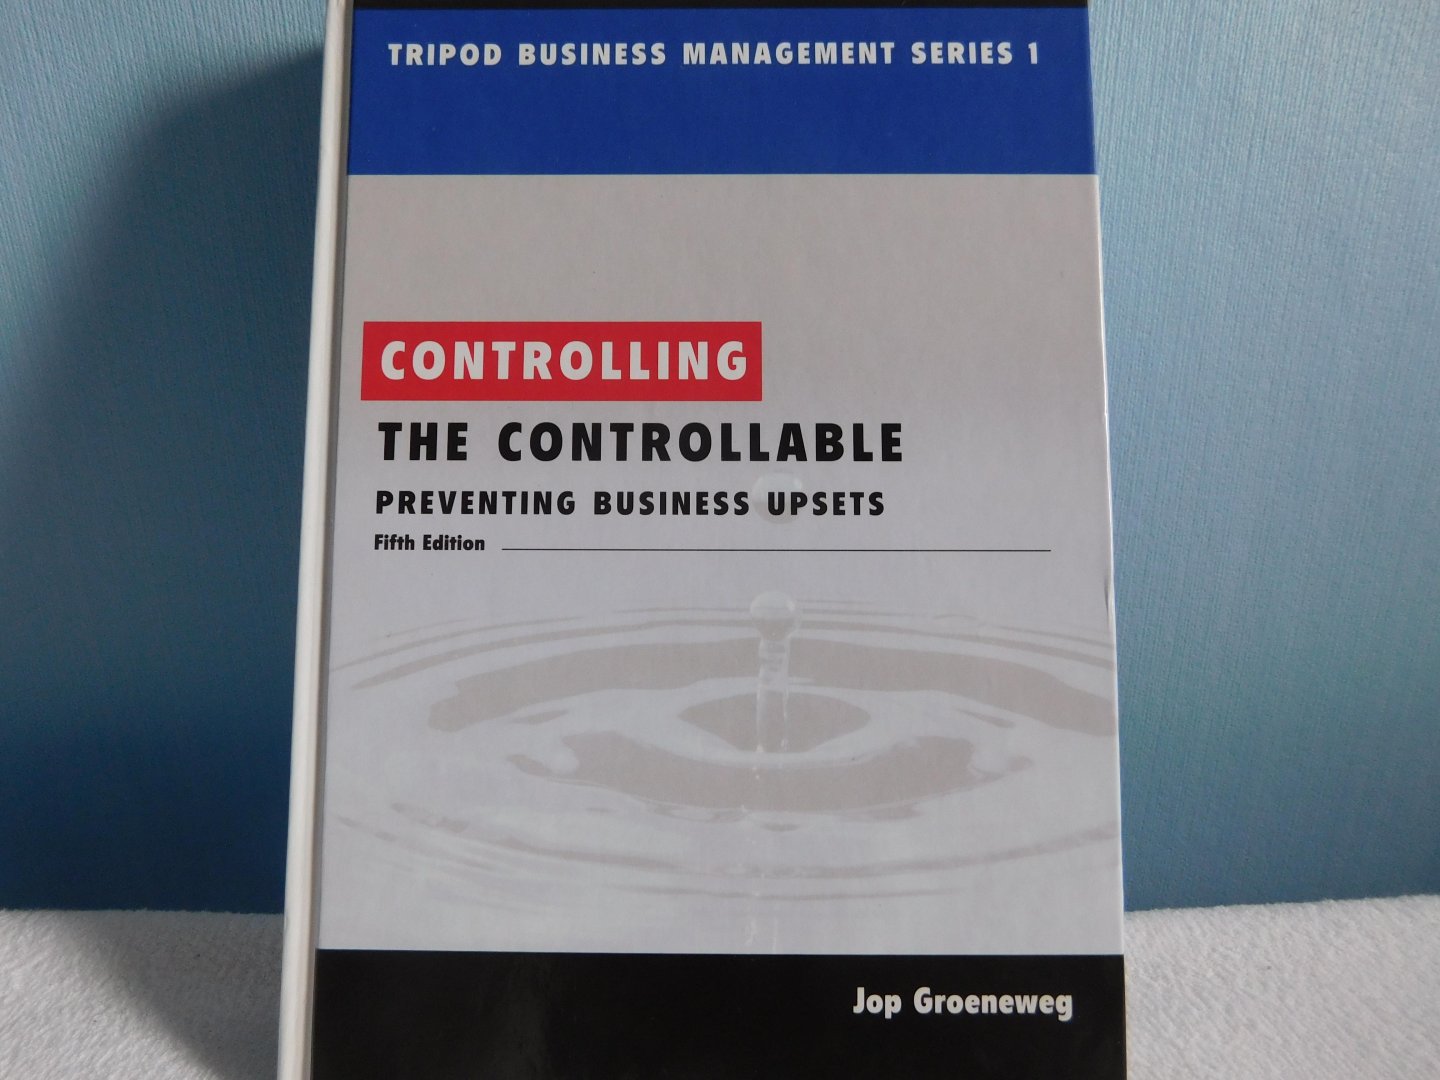 Groeneweg, J. - Controlling the controllable / Fifth Edition